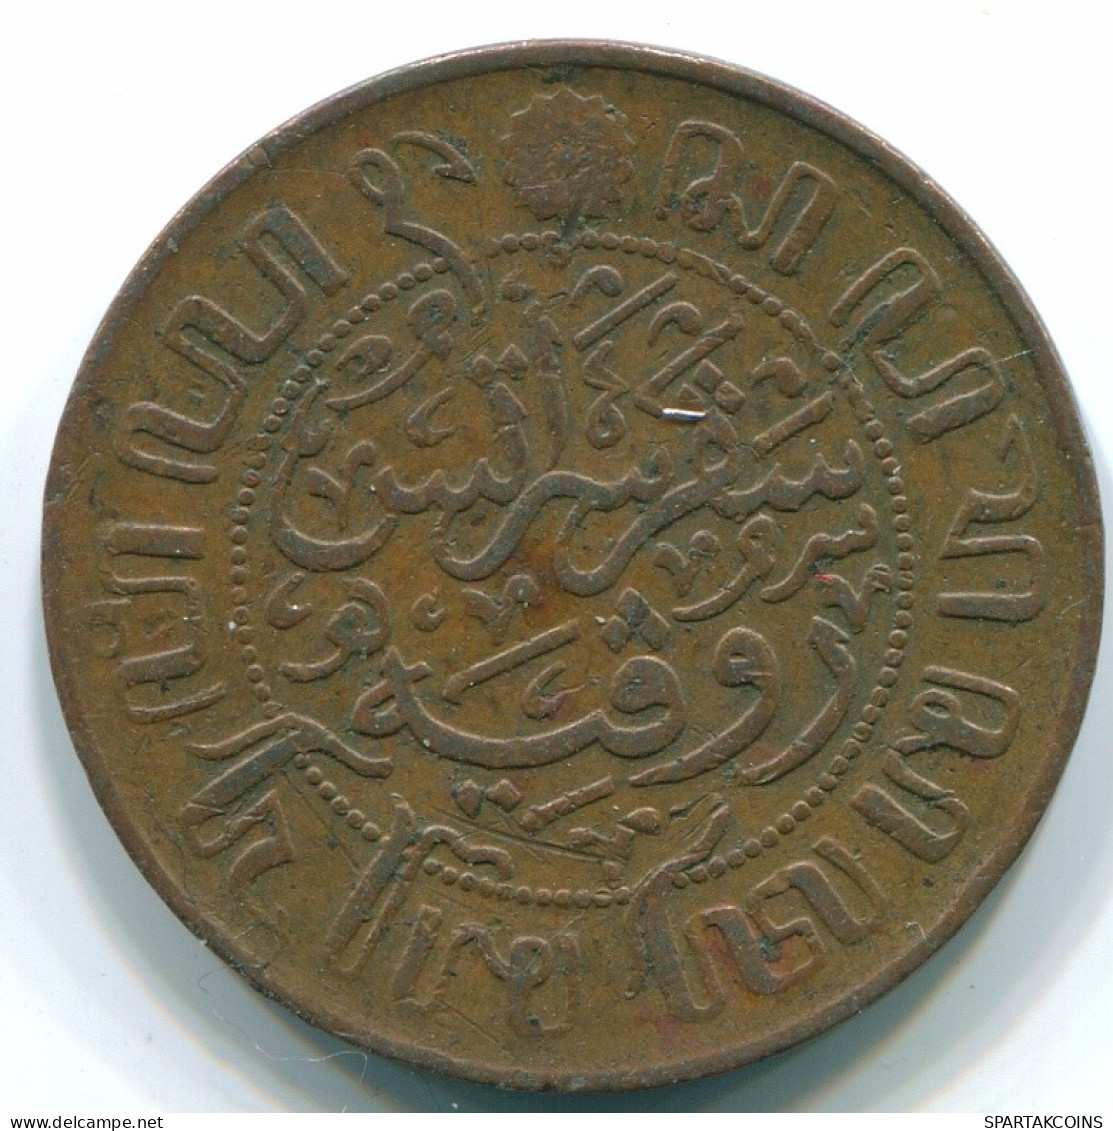 1 CENT 1929 NETHERLANDS EAST INDIES INDONESIA Copper Colonial Coin #S10103.U.A - Indes Néerlandaises